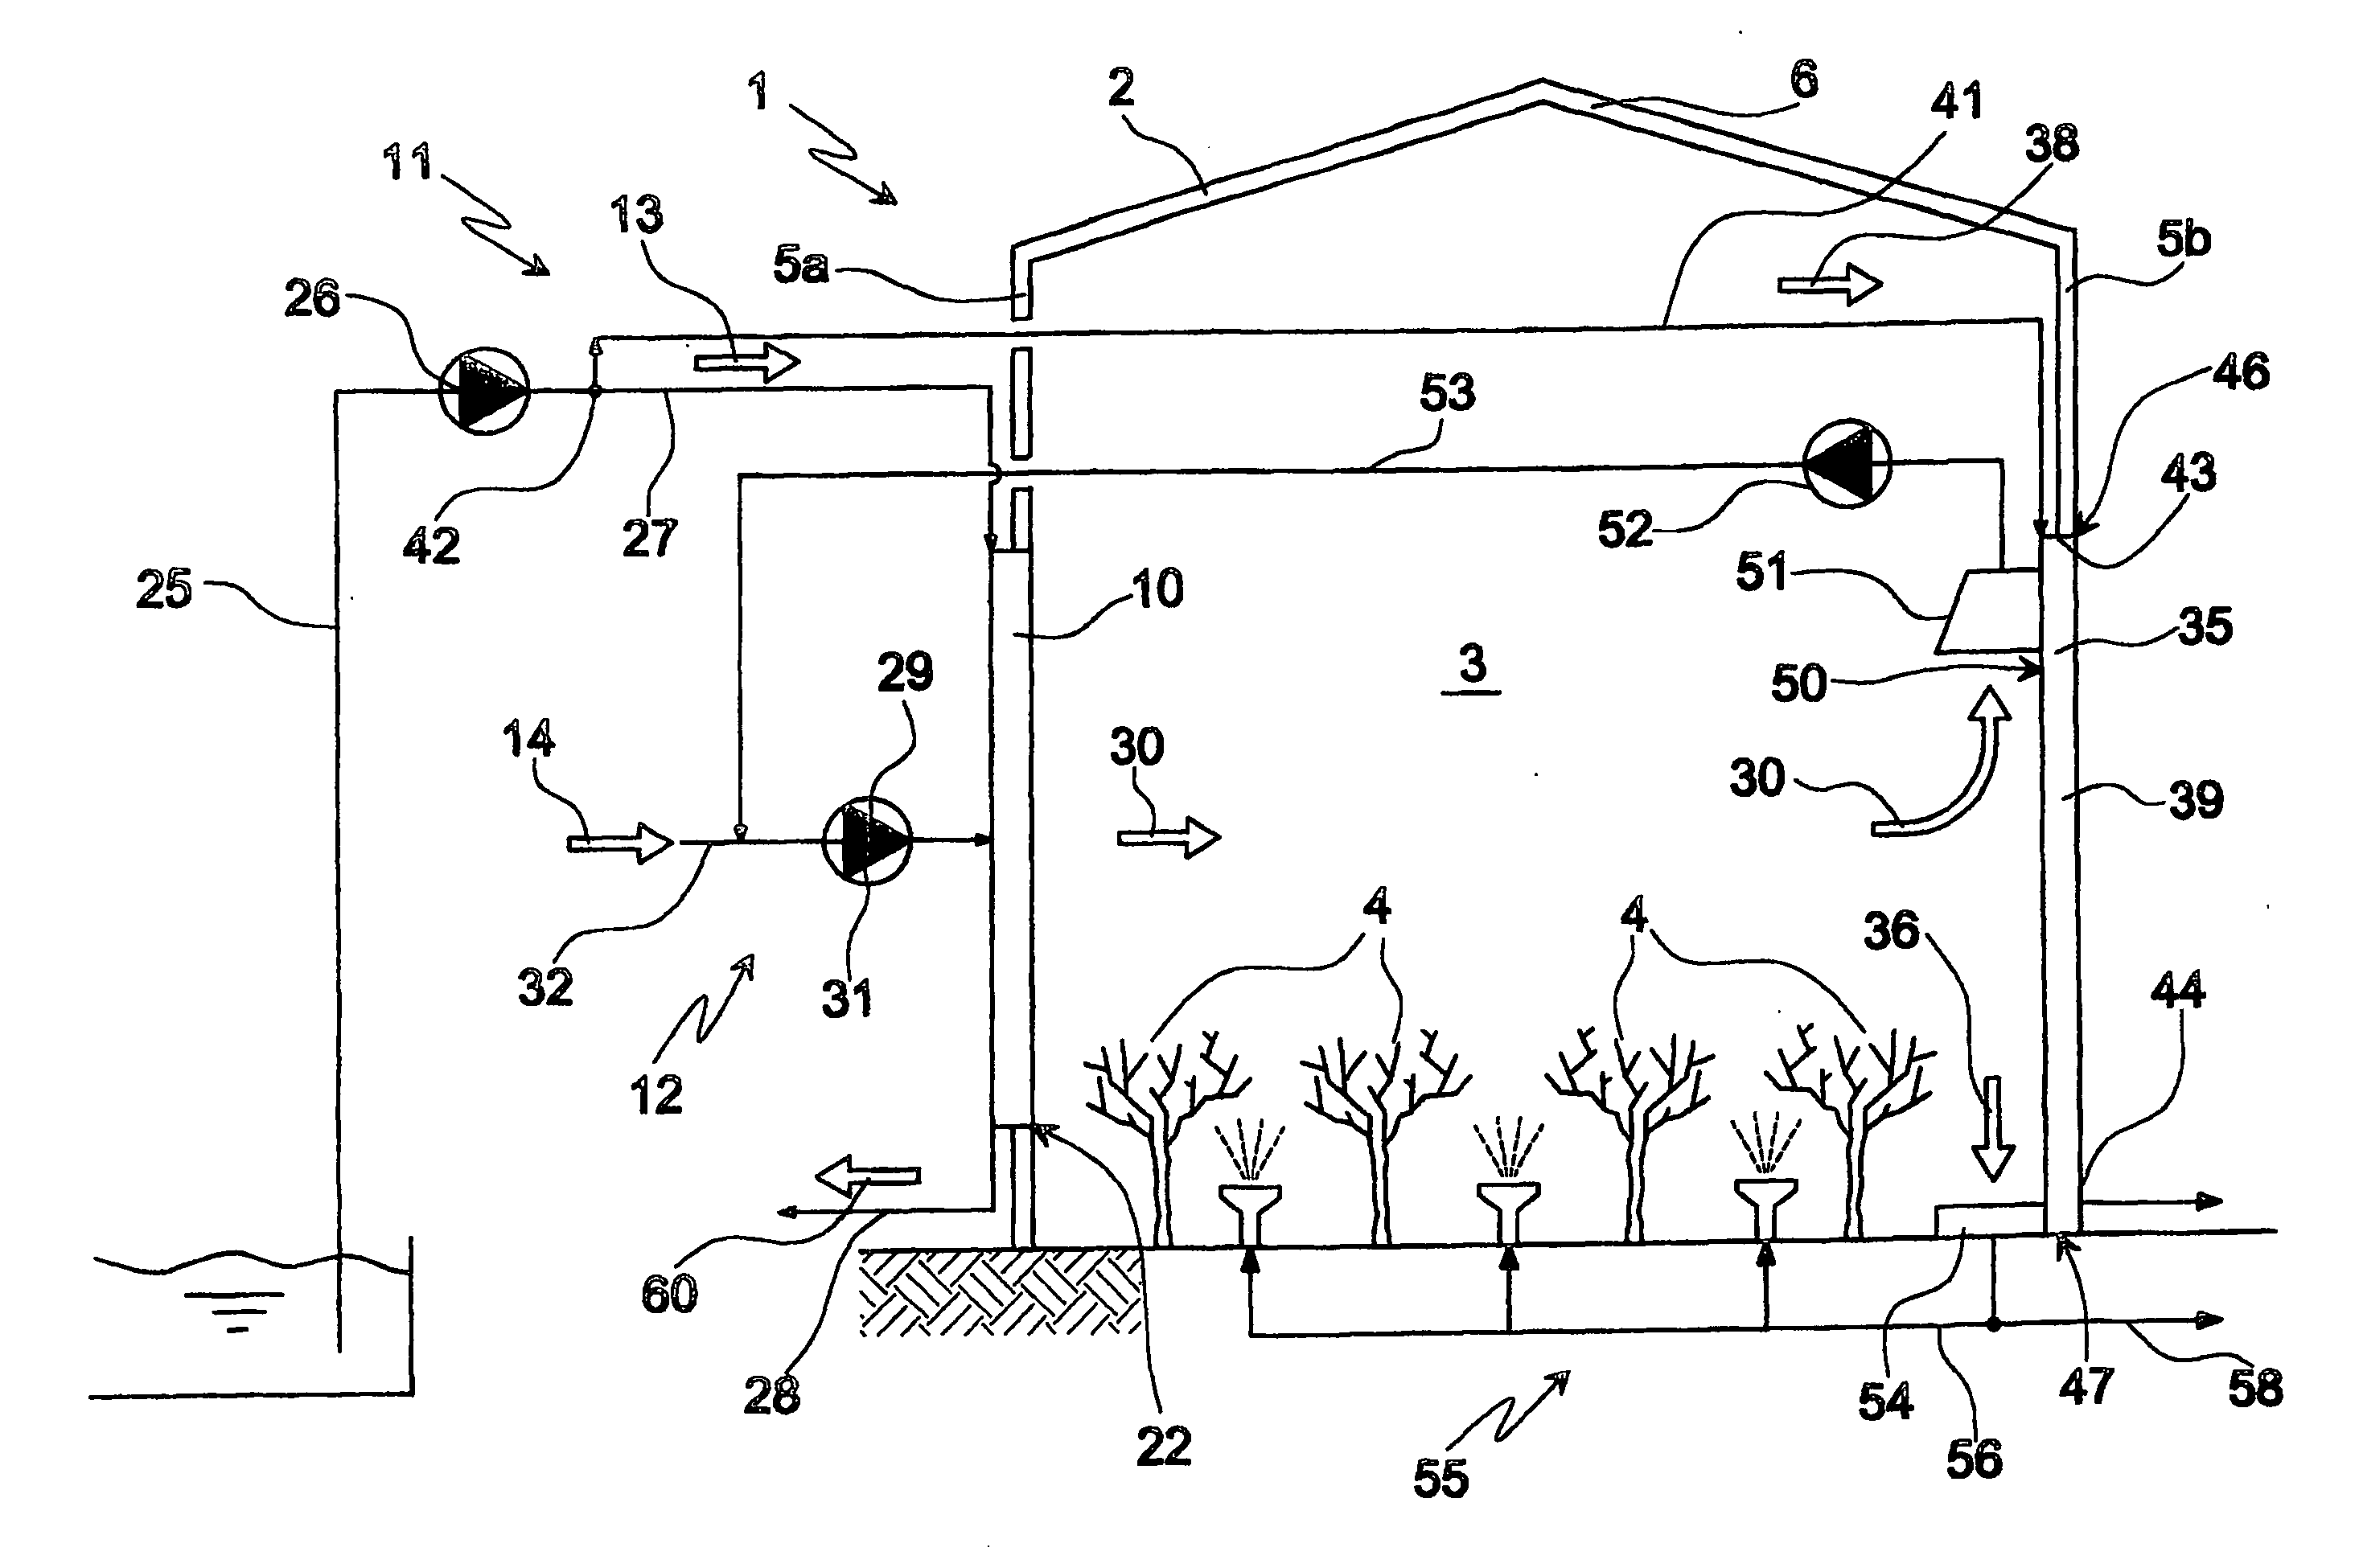 Greenhouse and method of cultivation under glass